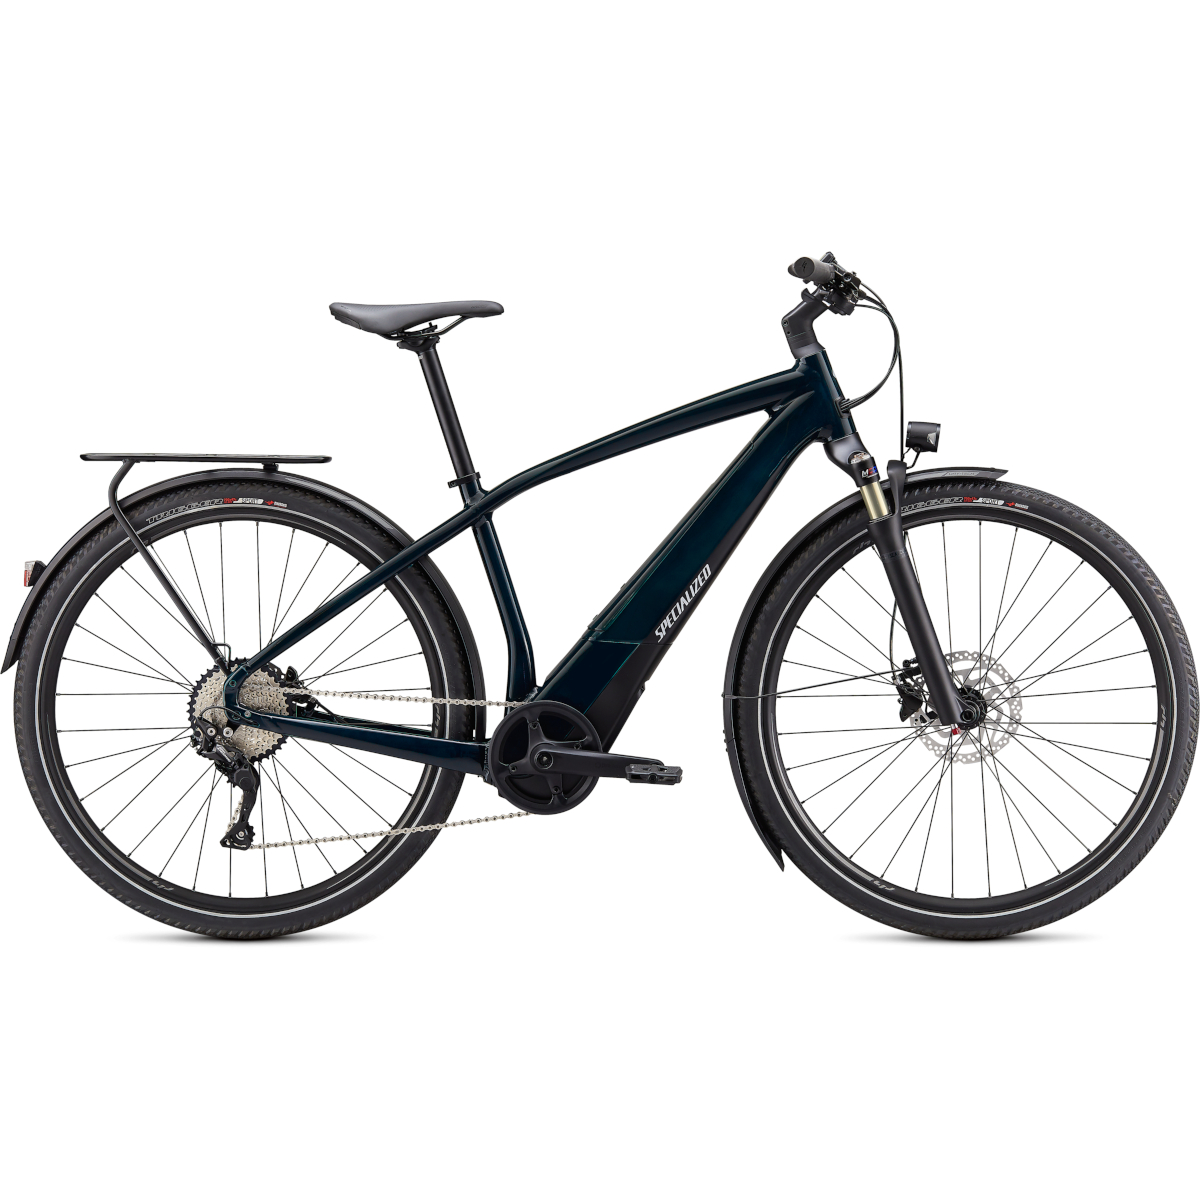 Picture of Specialized TURBO VADO 4.0 - E-Bike - 2021 - forest green / black / liquid silver - 2nd Choice